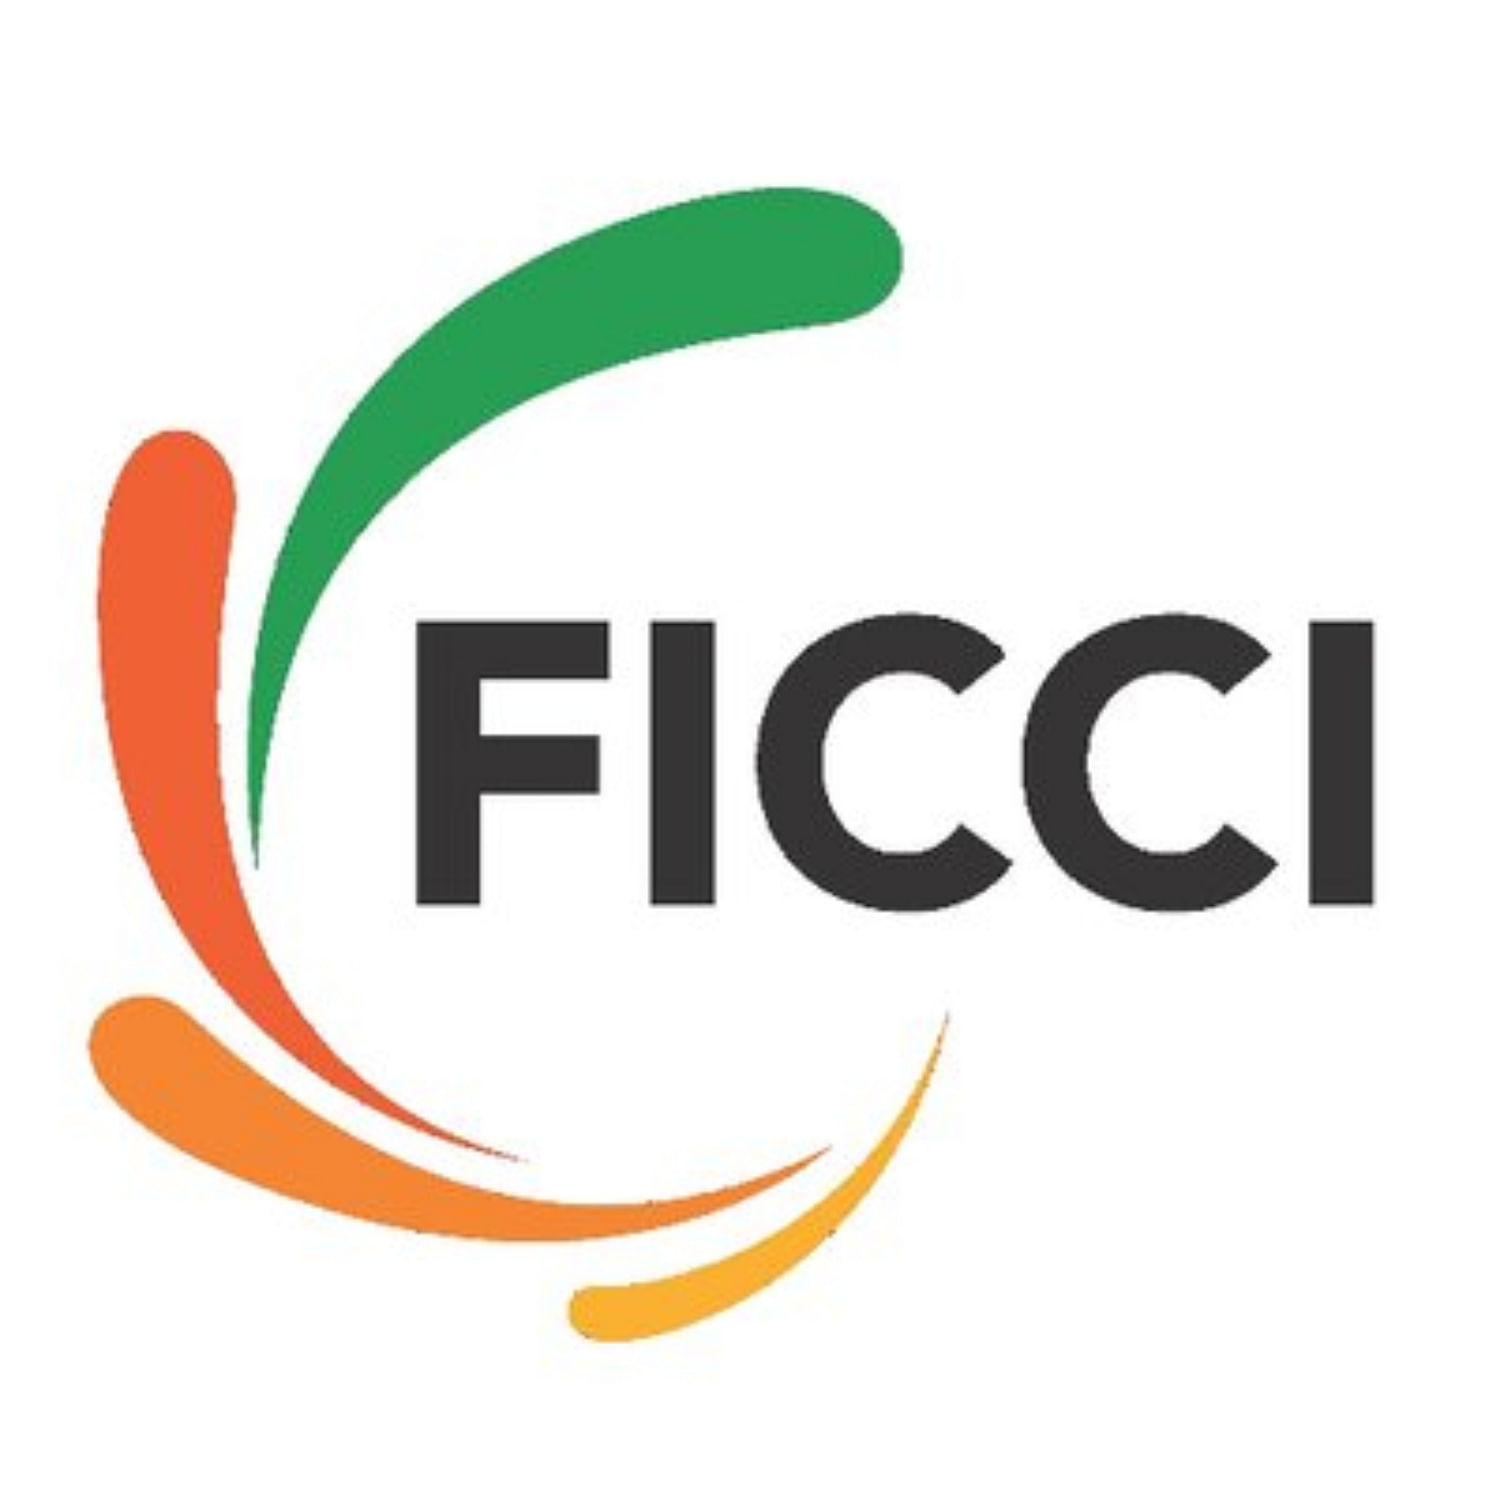 Ficci COVID-19 Response Taskforce, with representatives from leading private hospitals in India, has recommended that patients who are paying out of their own pocket should pay Rs 17,000 per day for treatment in an isolation ward, the industry chamber said in a statement. (File Image)